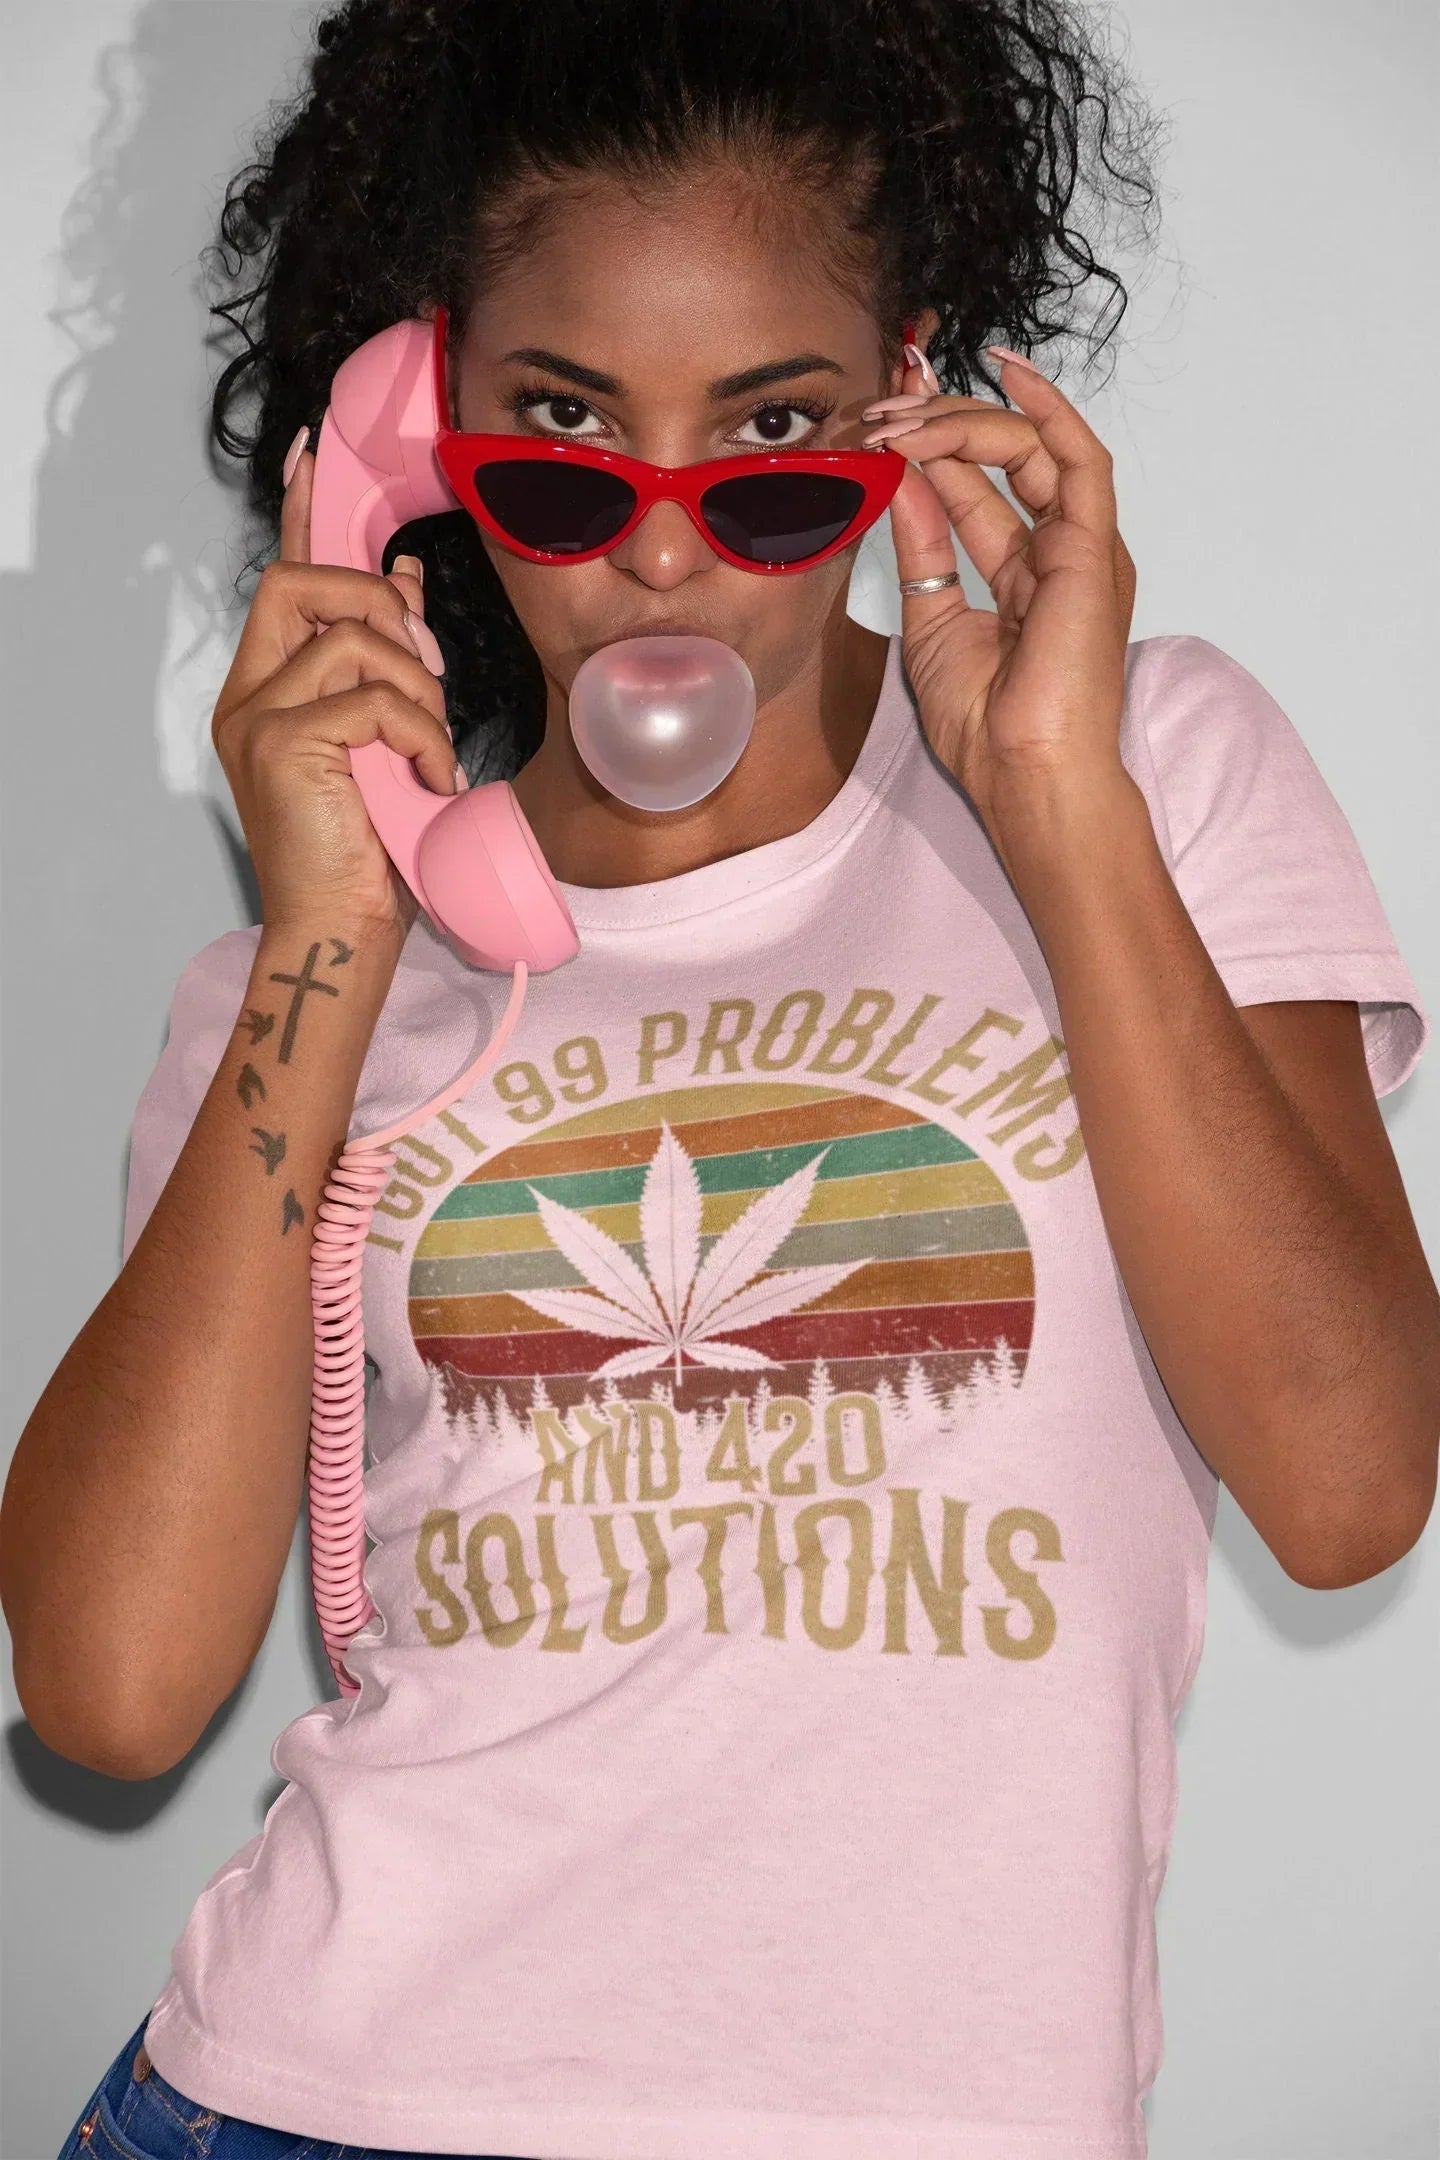 I Got 99 Problems and 420 Solutions Stoner Shirt